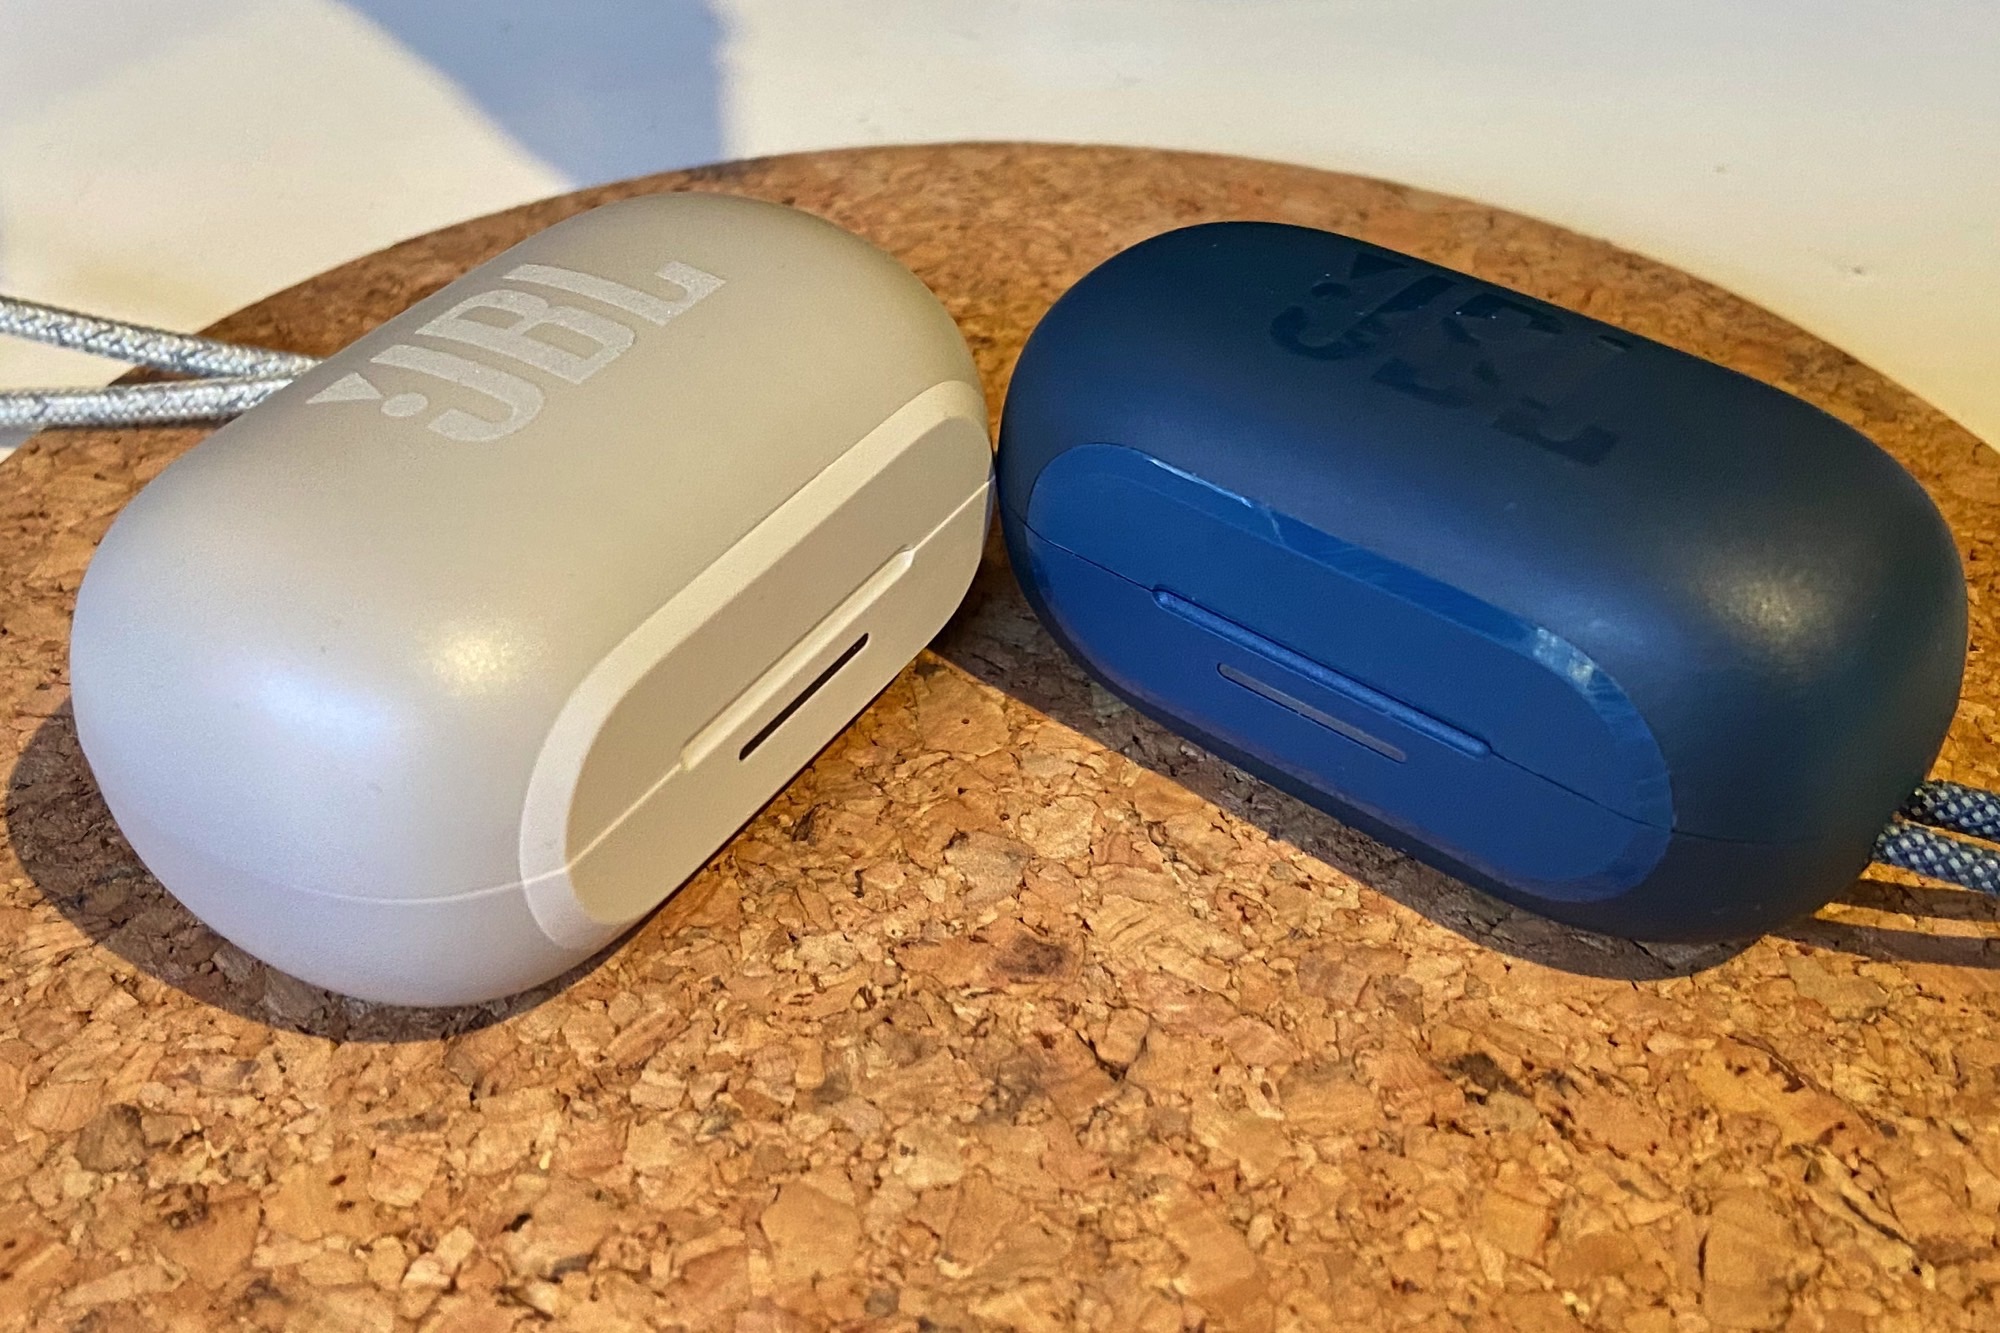 JBL Reflect Flow Pro review: noise-cancelling sports earbuds